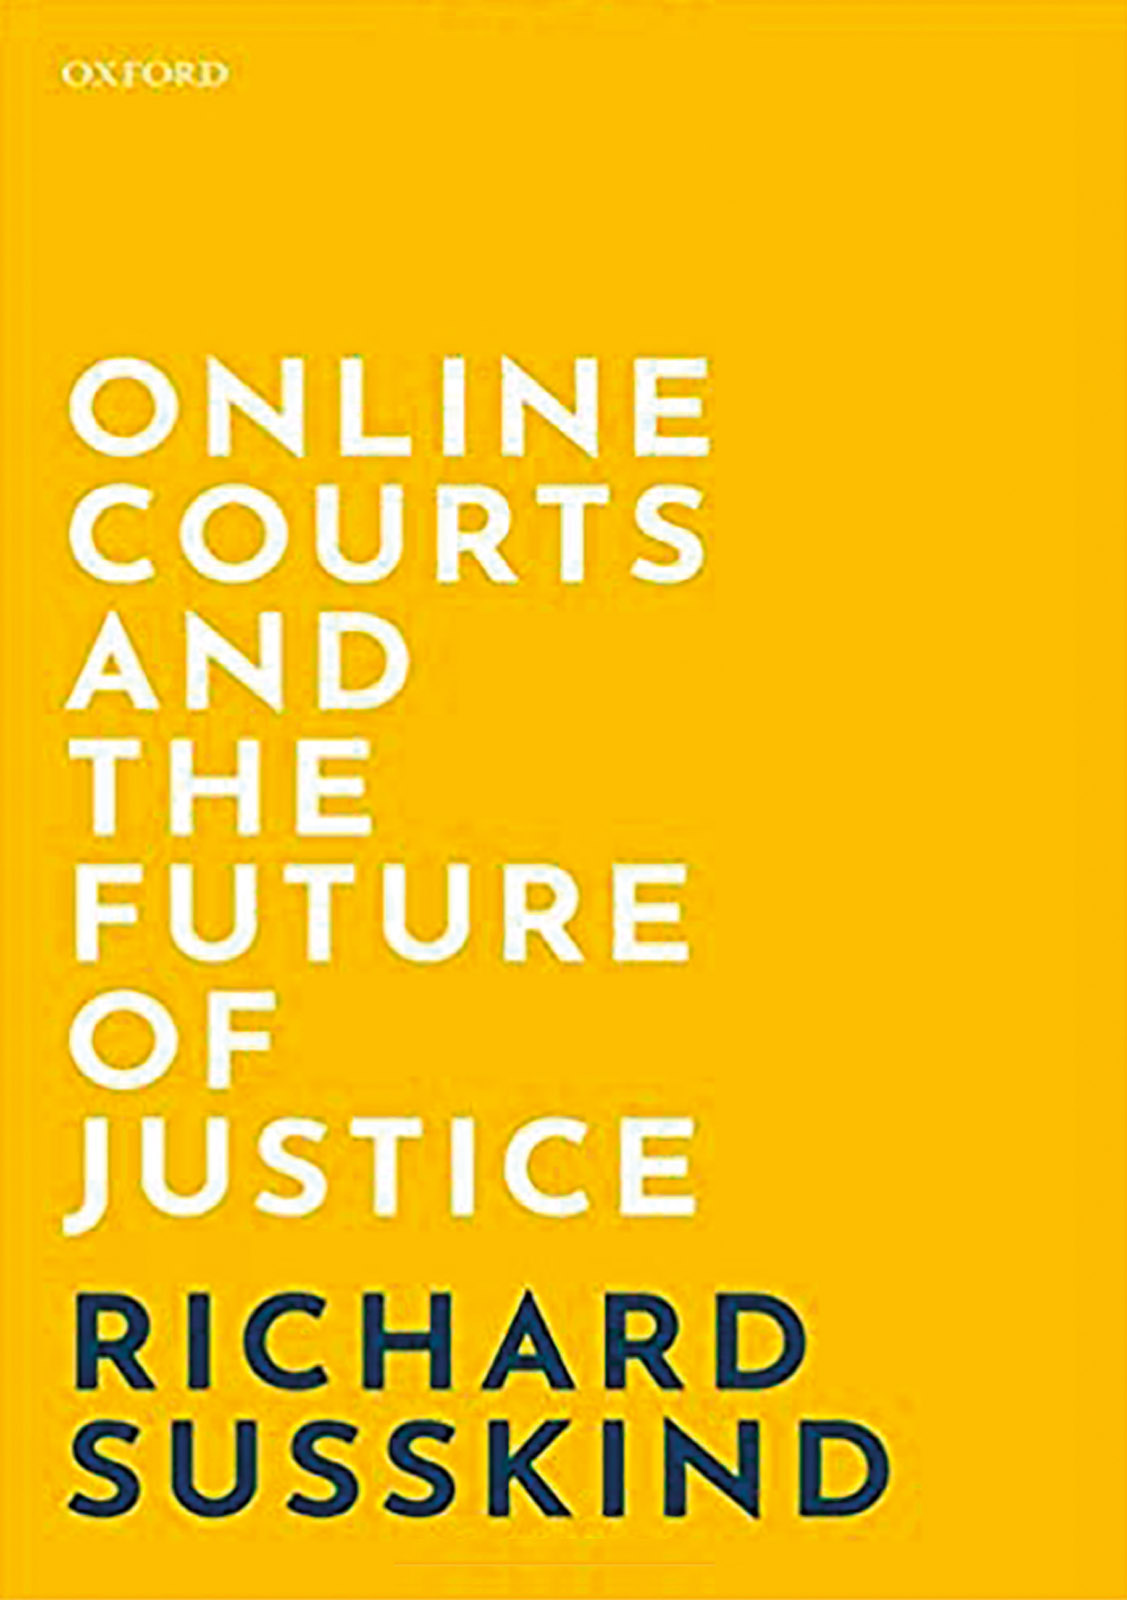 Cover - Online Courts and the future of justice, Richard Susskind